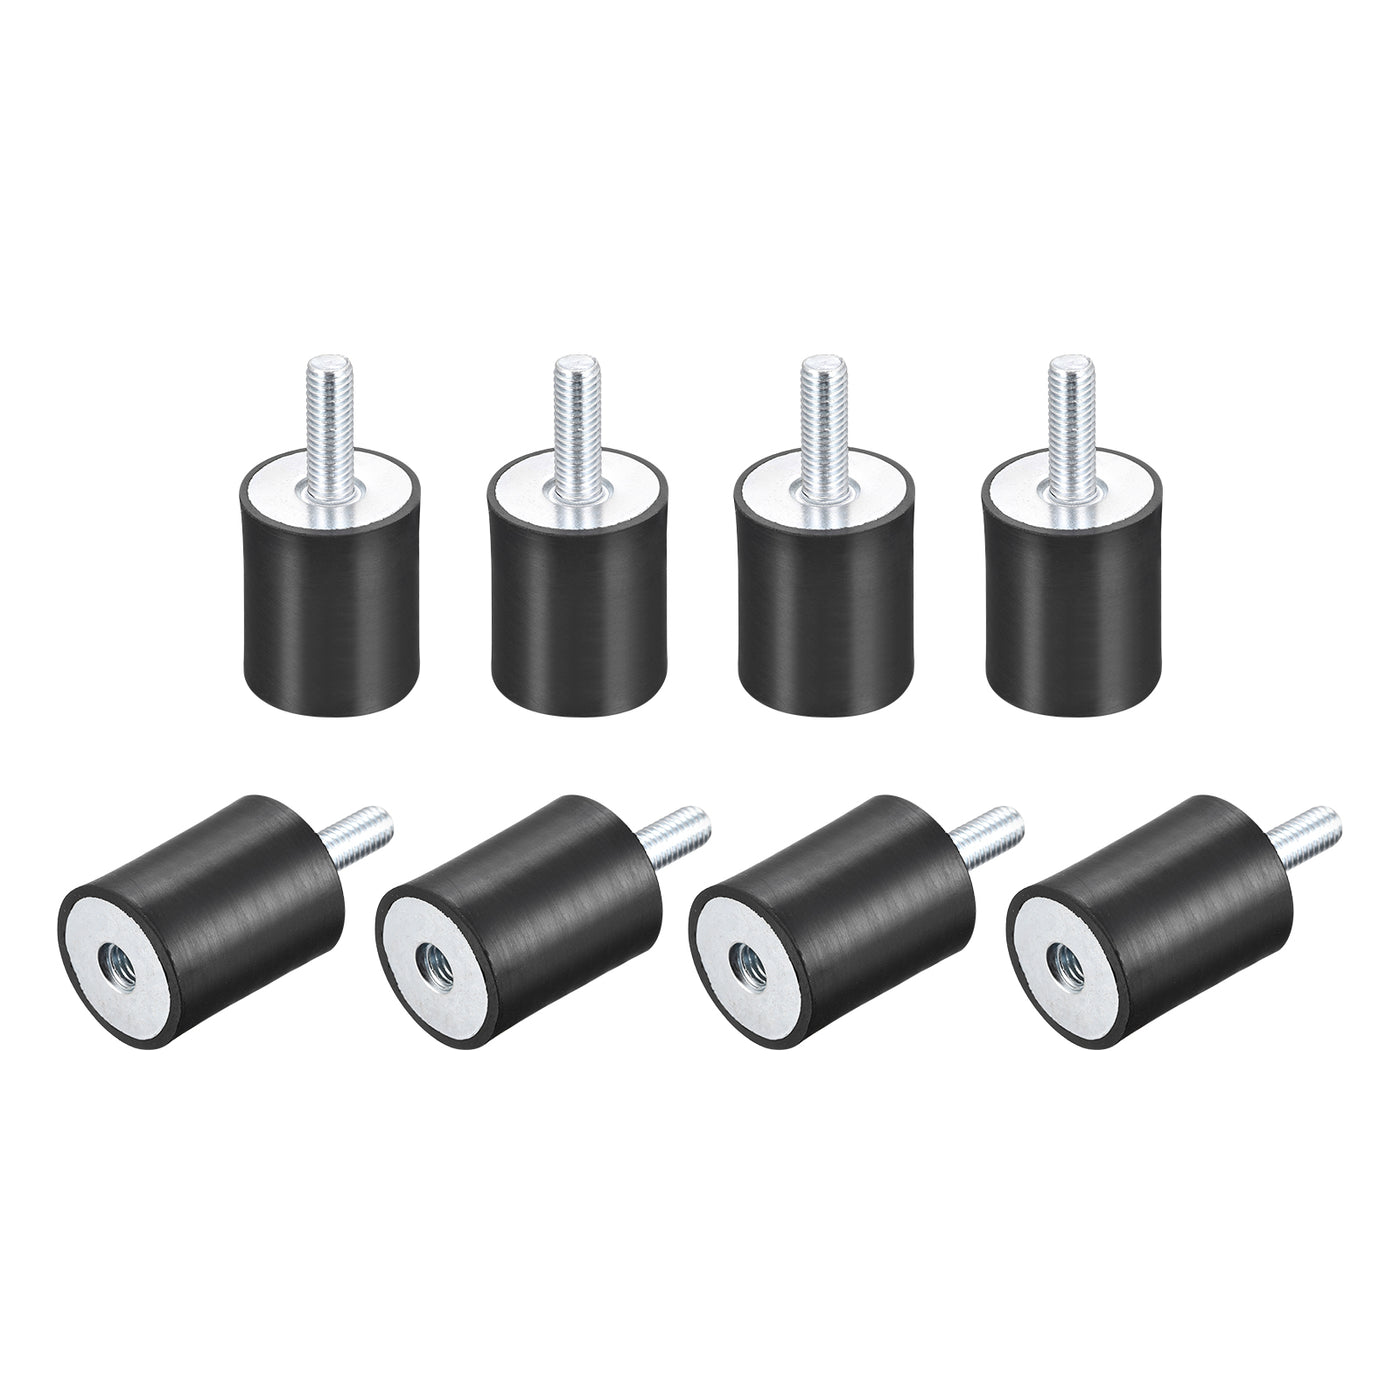 uxcell Uxcell Rubber Mount 8pcs M8 Male/Female Vibration Isolator Shock Absorber, D30mmxH40mm